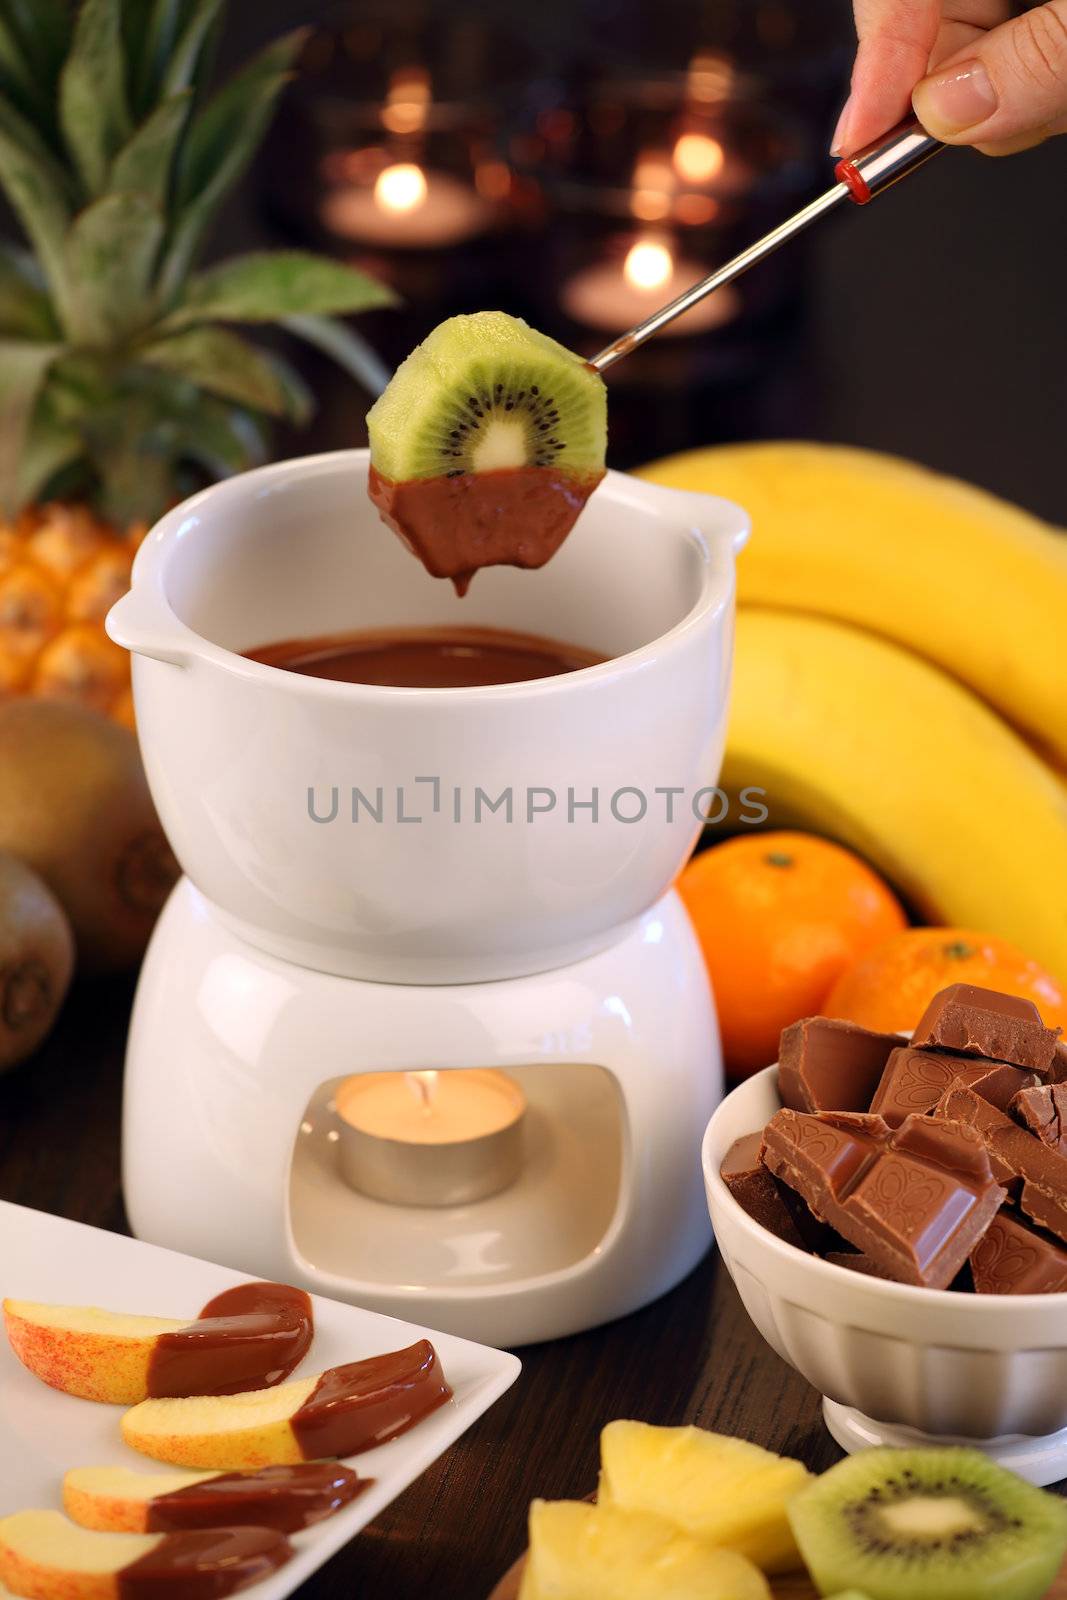 Photo of a kiwi slice being dipped into the bowl of the chocolate fondue. Selective focus on the kiwi.